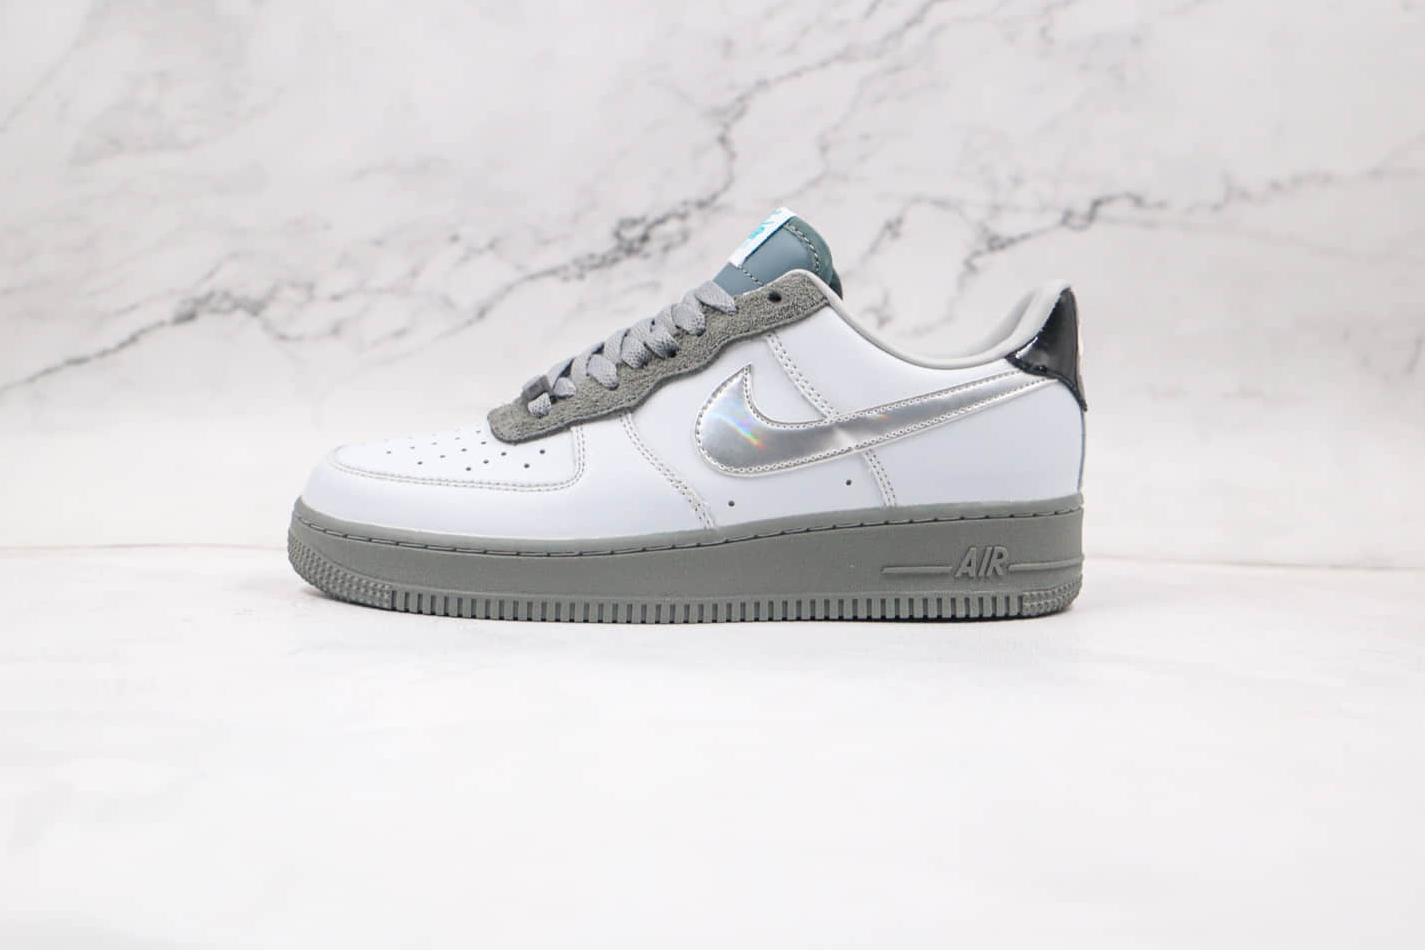 Nike Air Force 1 Low University Light Grey Silver Army DC1163-100 - Stylish Sneakers for Every Day